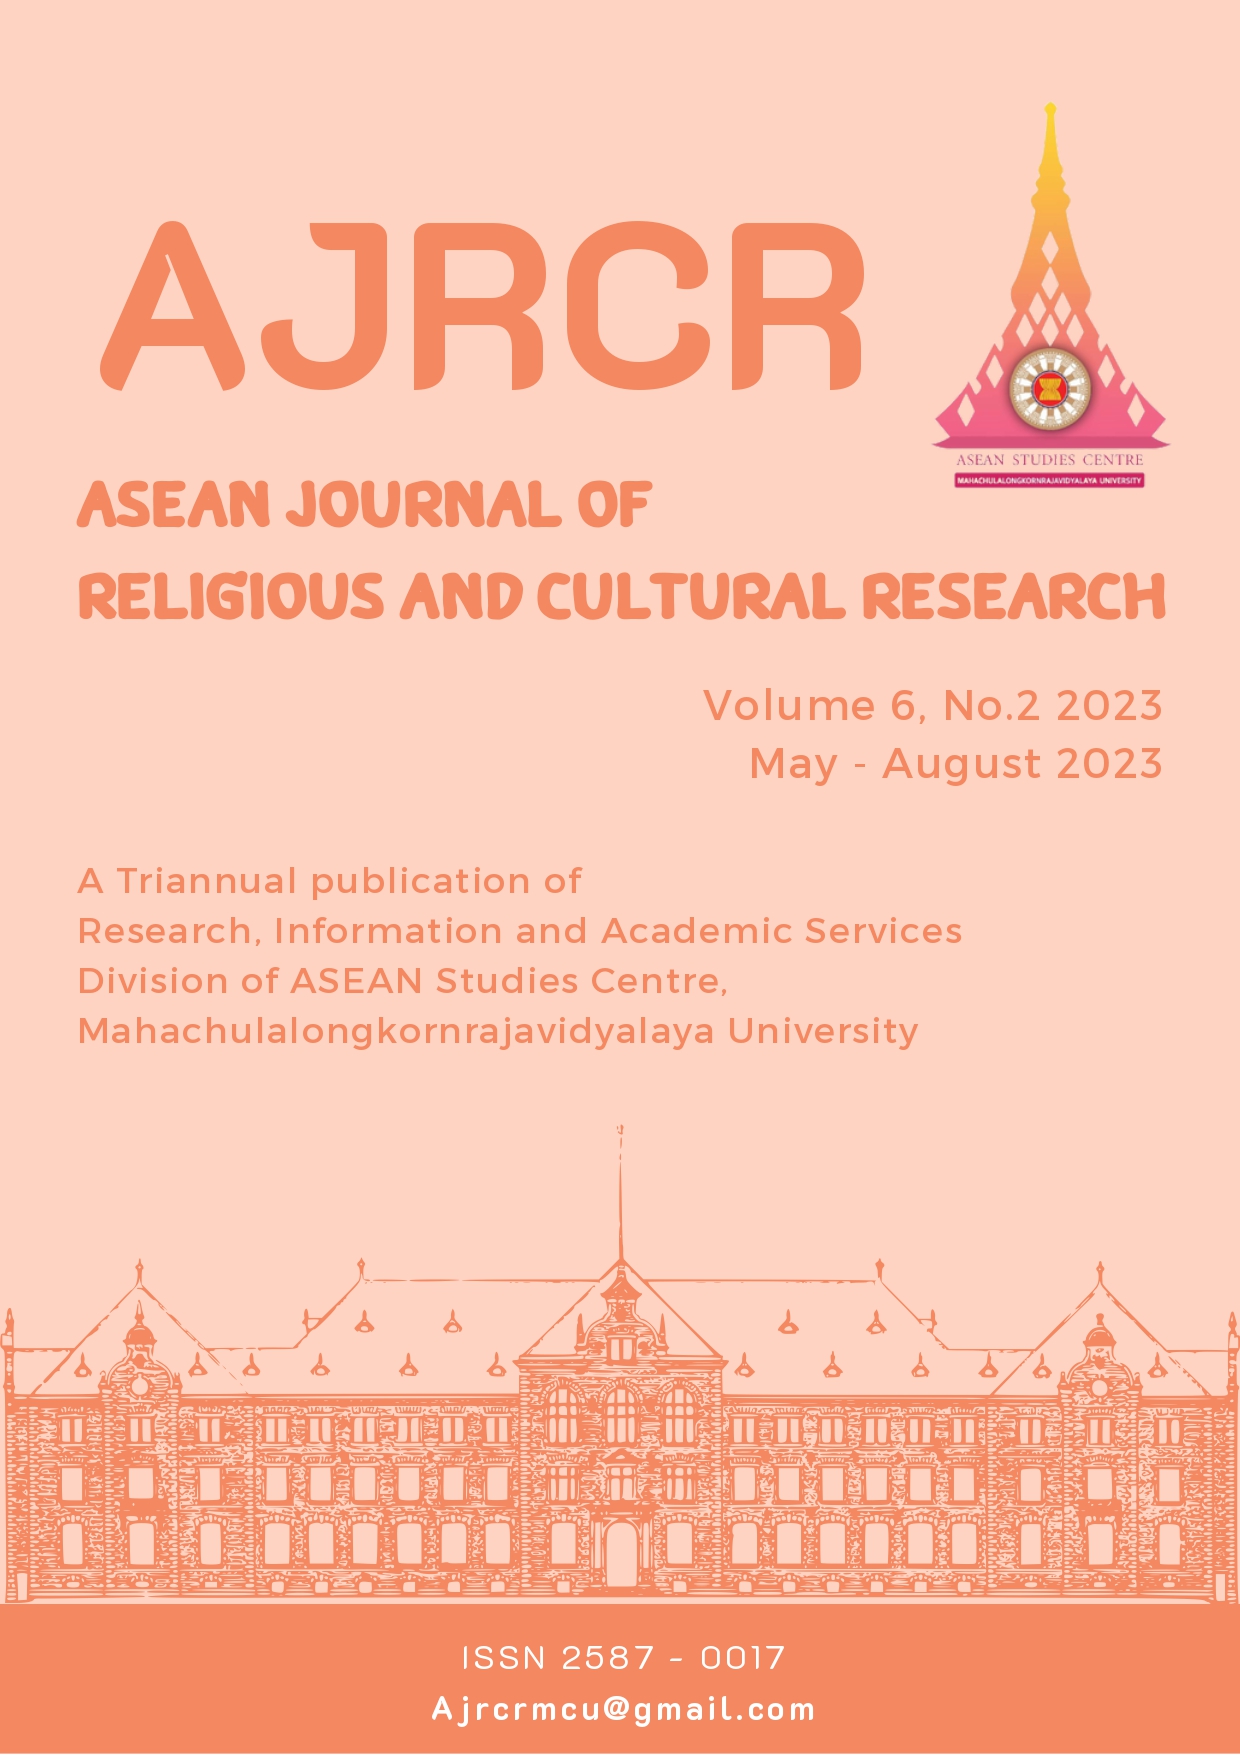 					View Vol. 6 No. 2 (2023): ASEAN Journal of Religious and Cultural Research (AJRCR)
				